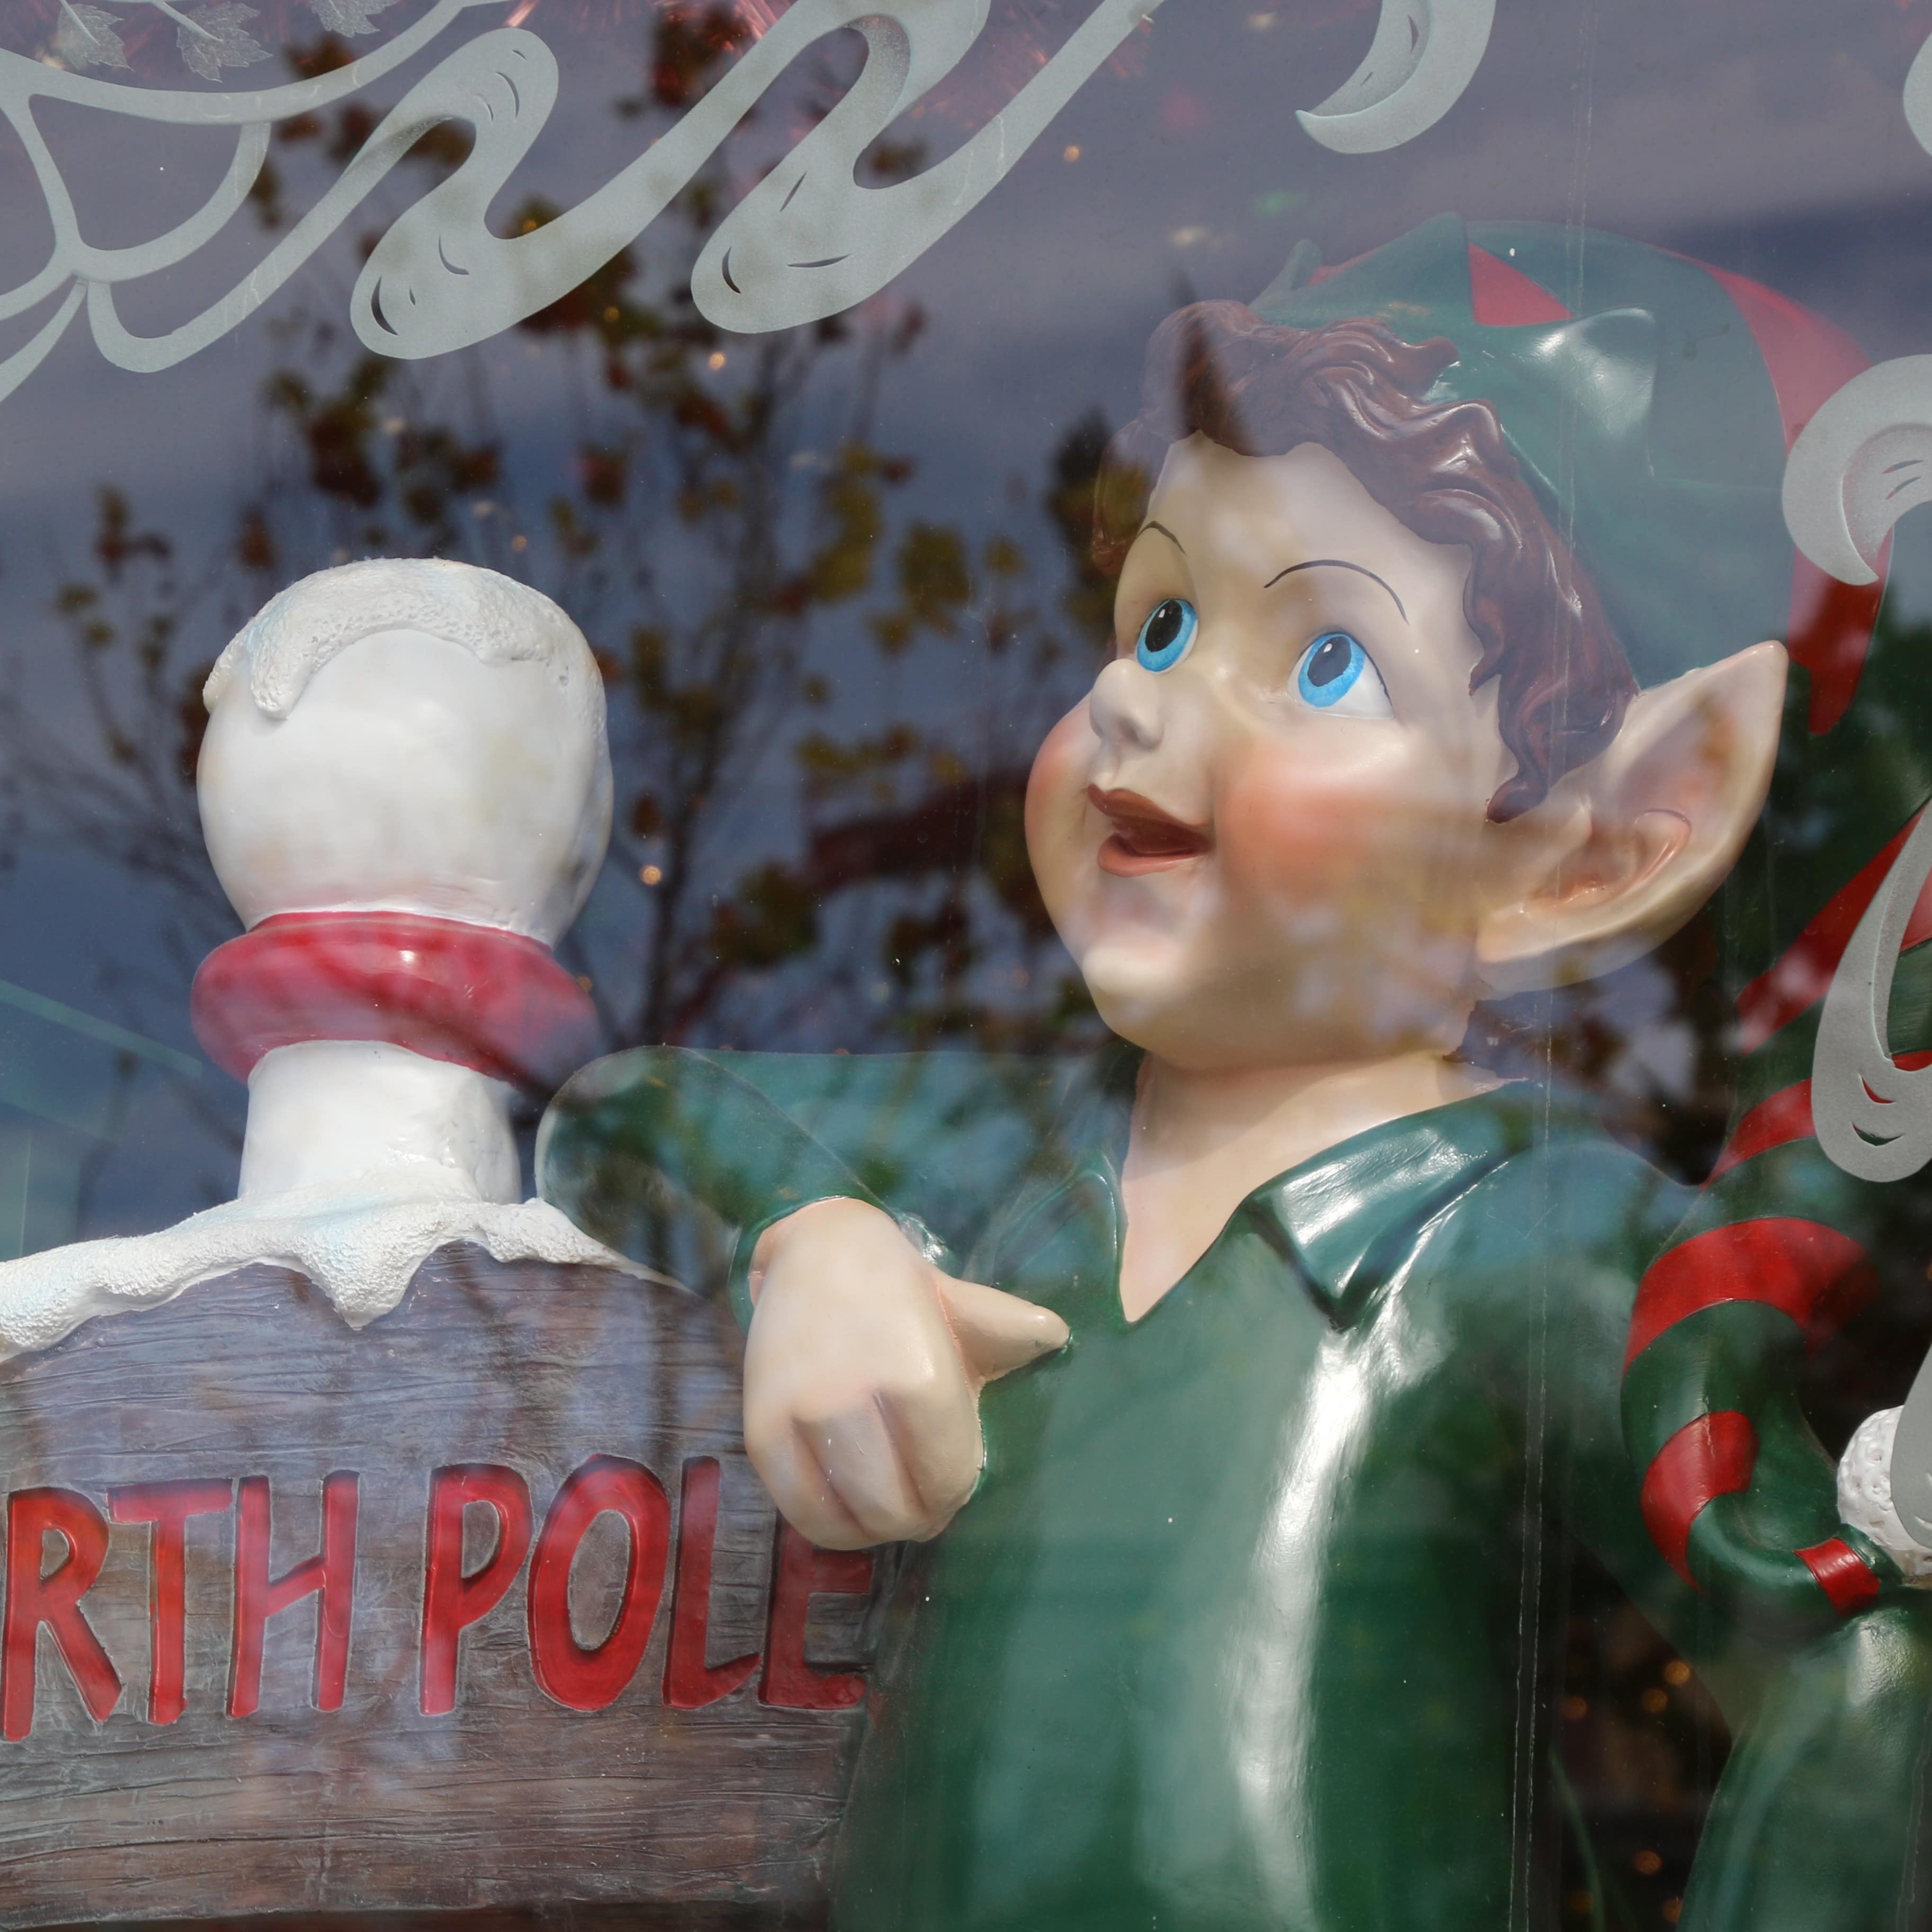 Elf in store window leaning on North Pole post